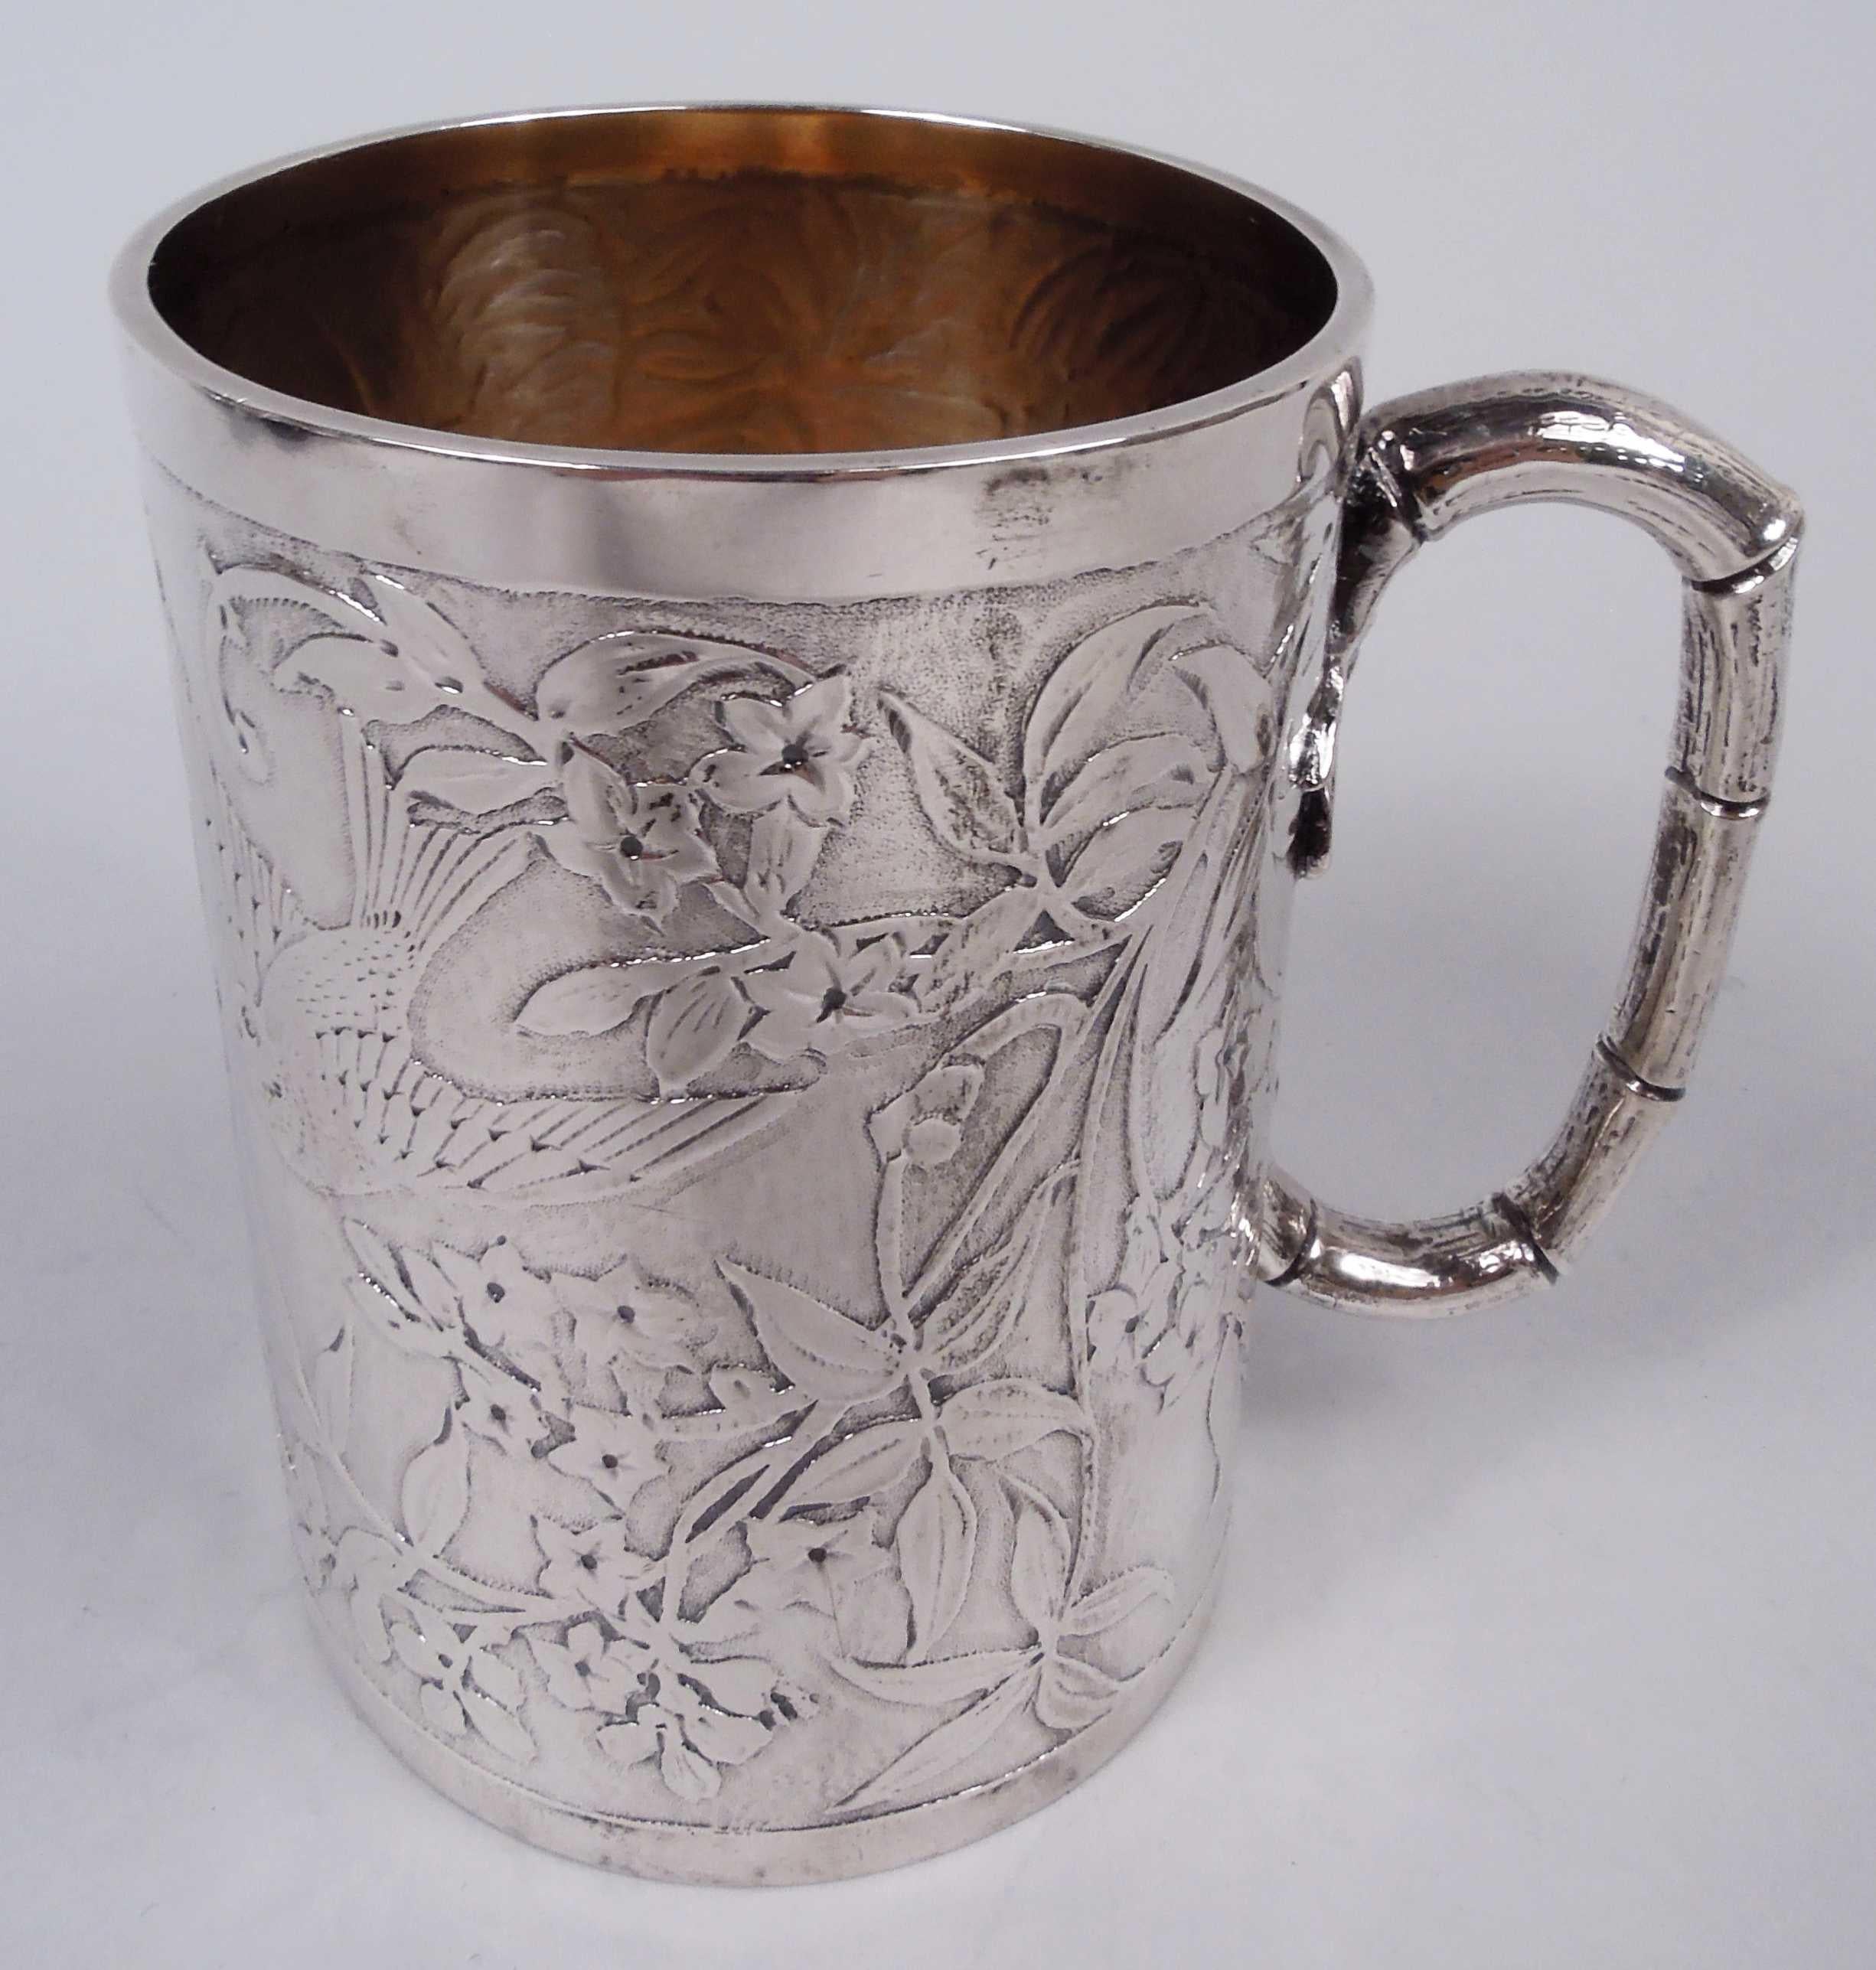 Gorgeous Victorian Japonesque sterling silver baby cup. Made by William Hunter in London in 1877. Straight and upward tapering sides; leaf-mounted bamboo-style c-scroll handle. Dense and stylized acid-etched ornament with birds flitting amongst